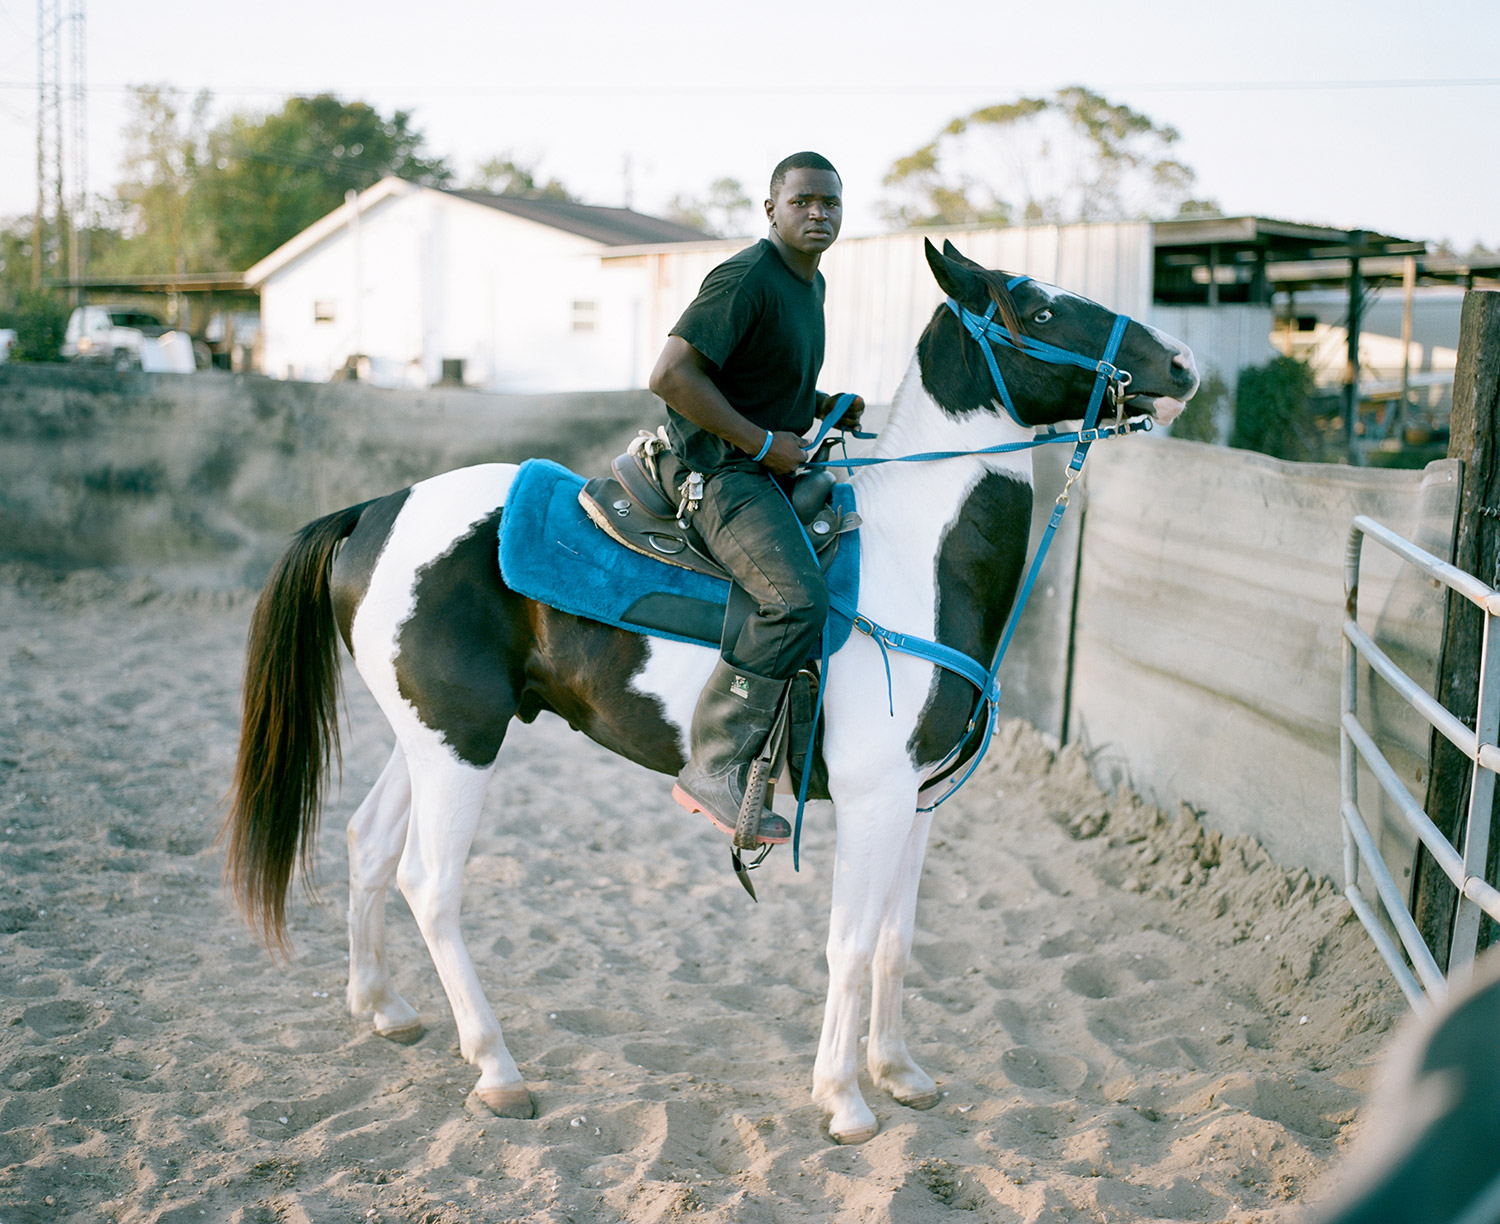 Jesse trains and preps his horse named "Dream" for Mardi Gras. 2014